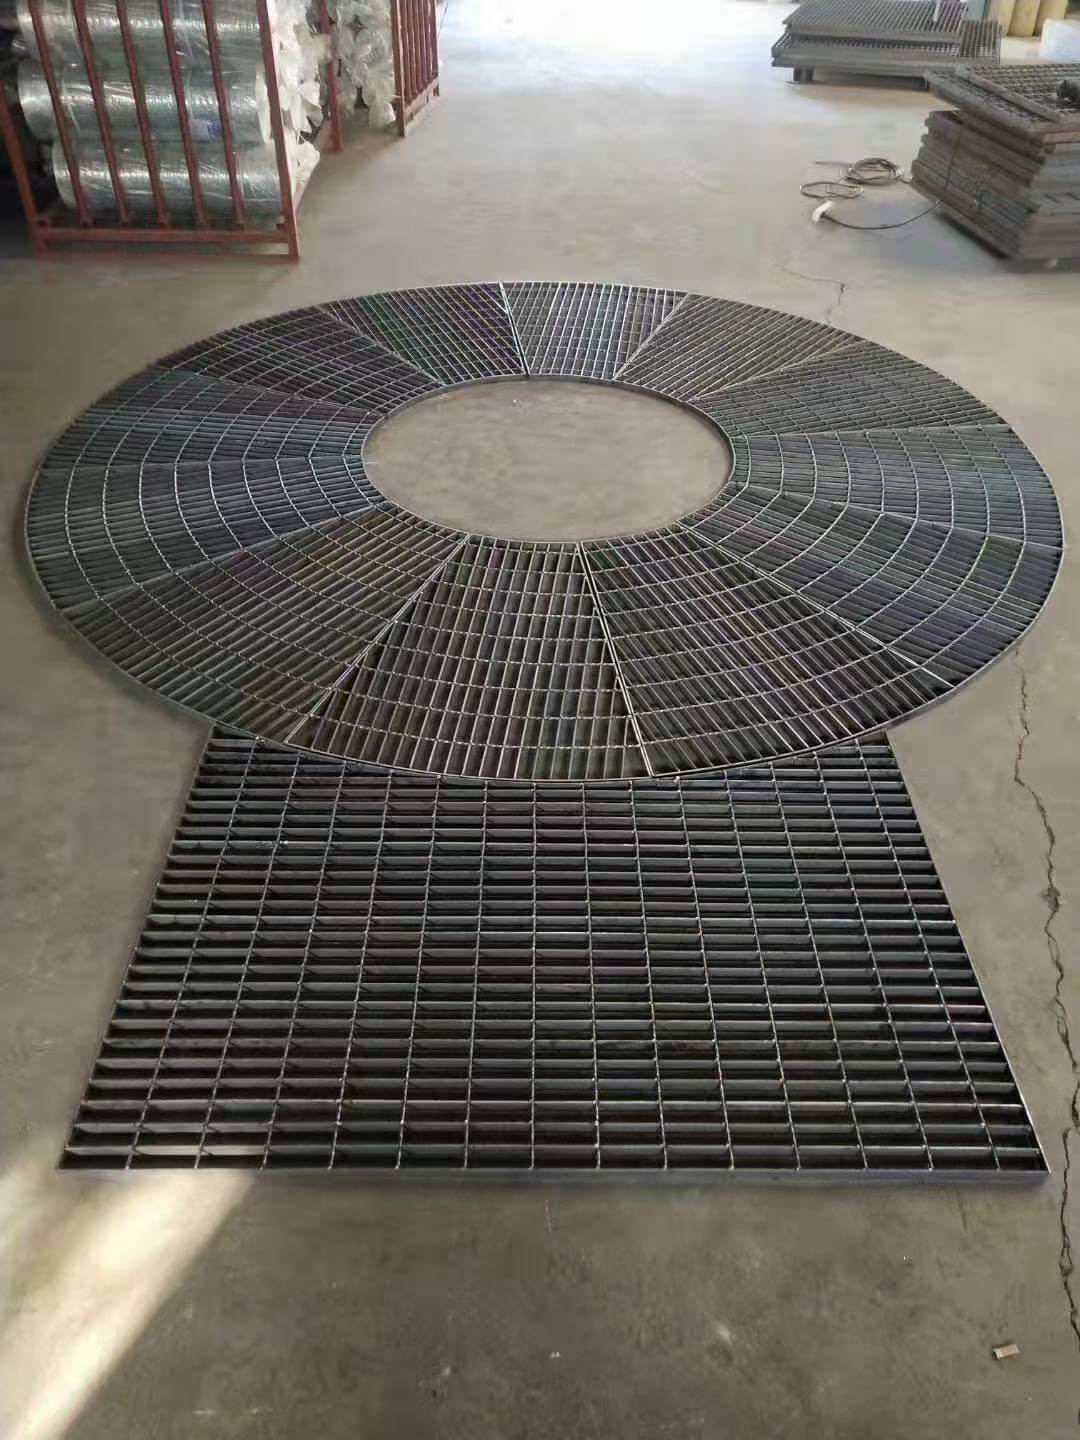 https://www.abxfence.com/wp-content/uploads/2021/12/metal-drainage-grate.jpg